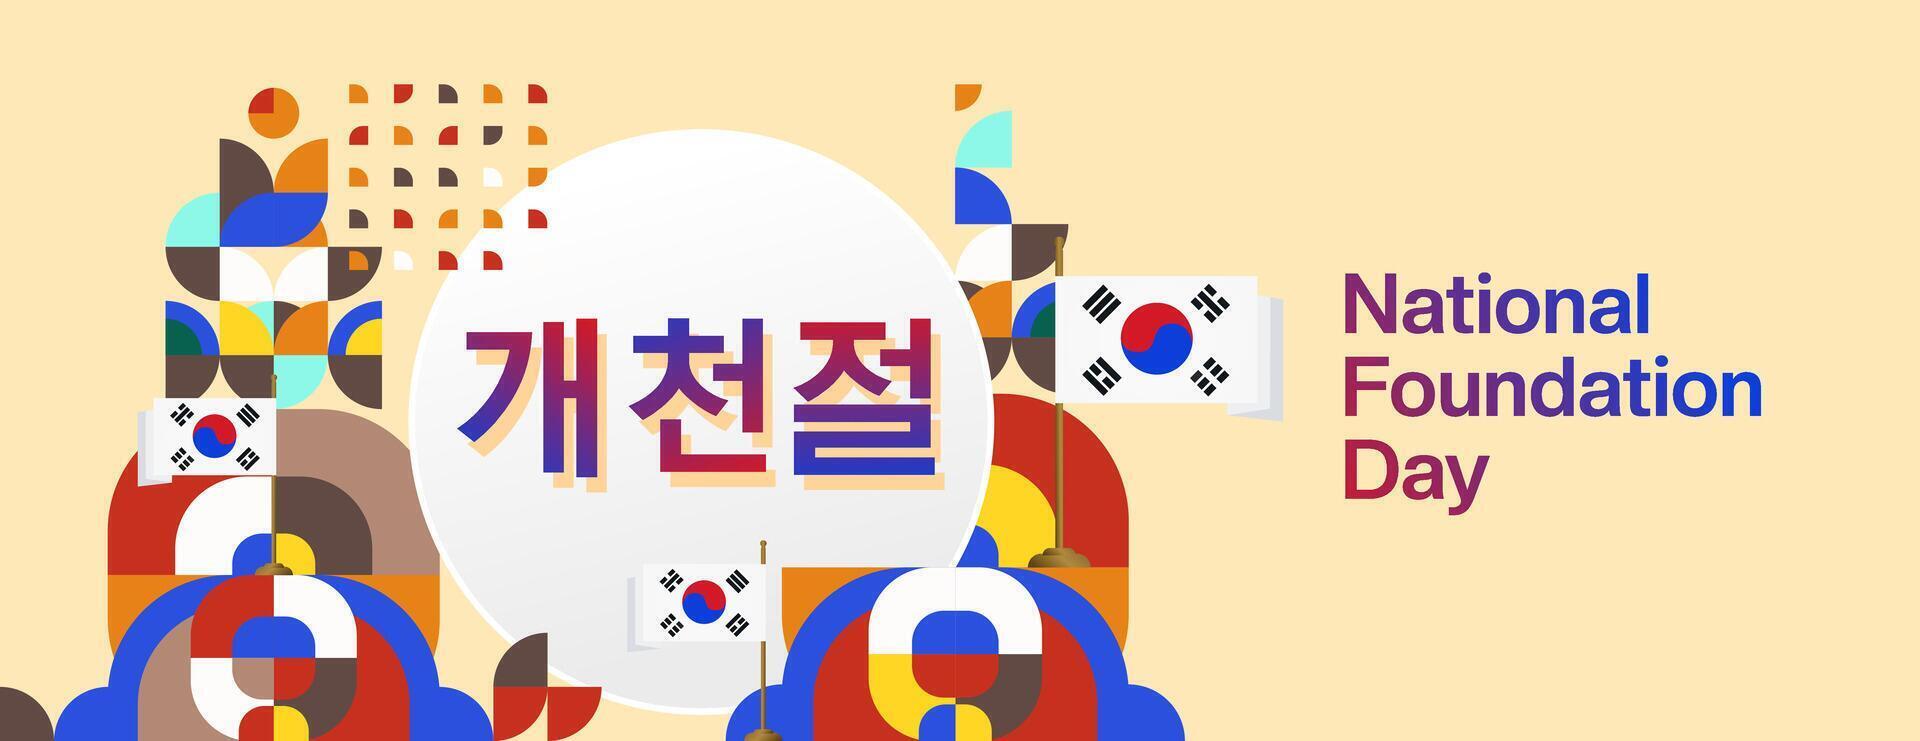 Korea National Foundation Day wide banner in colorful modern geometric style. Happy Gaecheonjeol day is South Korean national foundation day. Vector illustration for national holiday